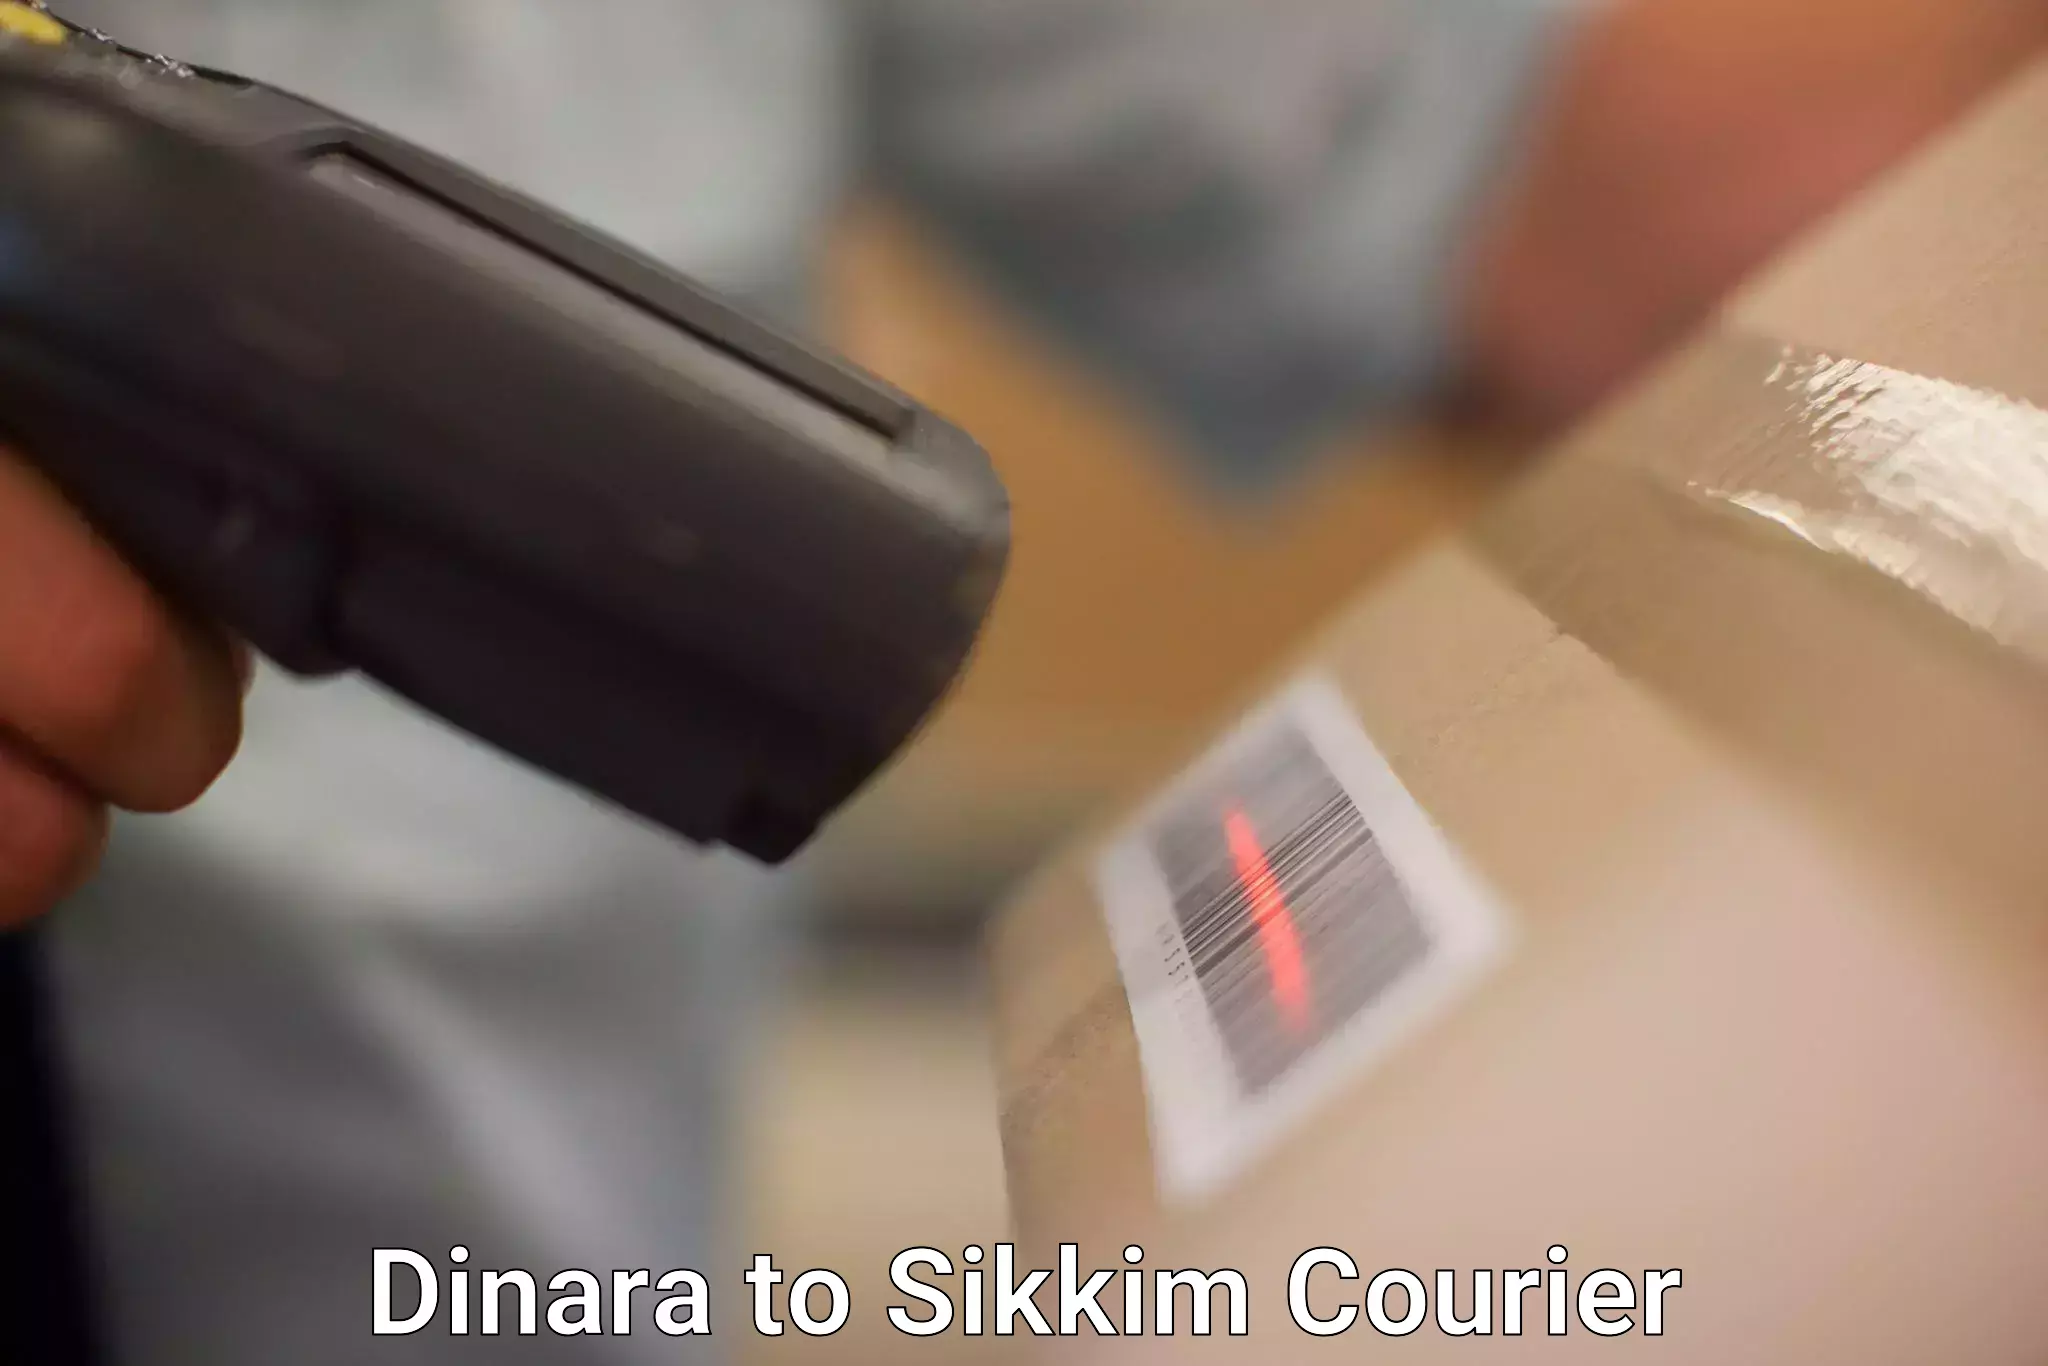 Cash on delivery service Dinara to Sikkim